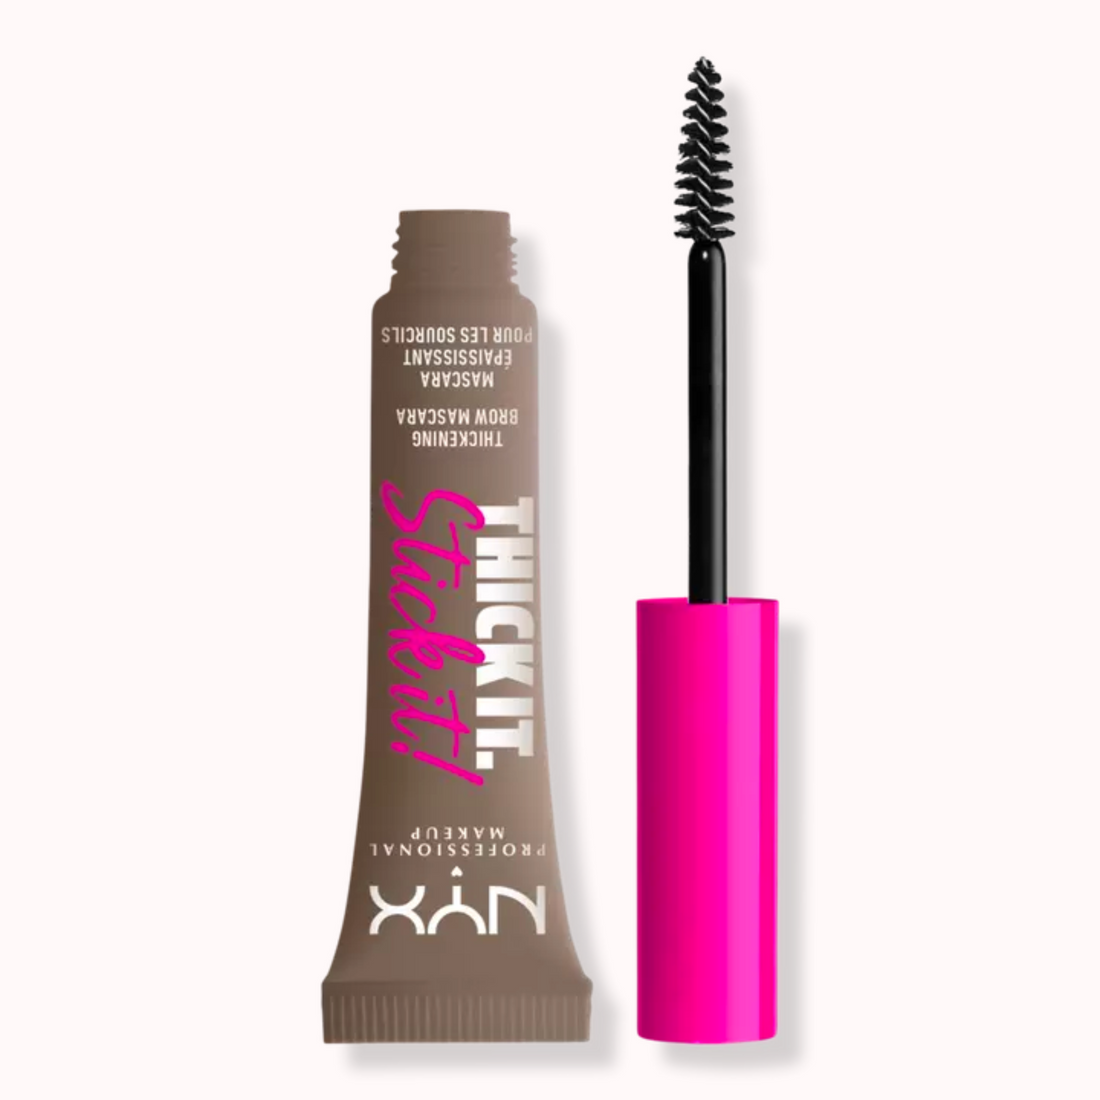 Thick it Stick it! Thickening Brow Gel Mascara